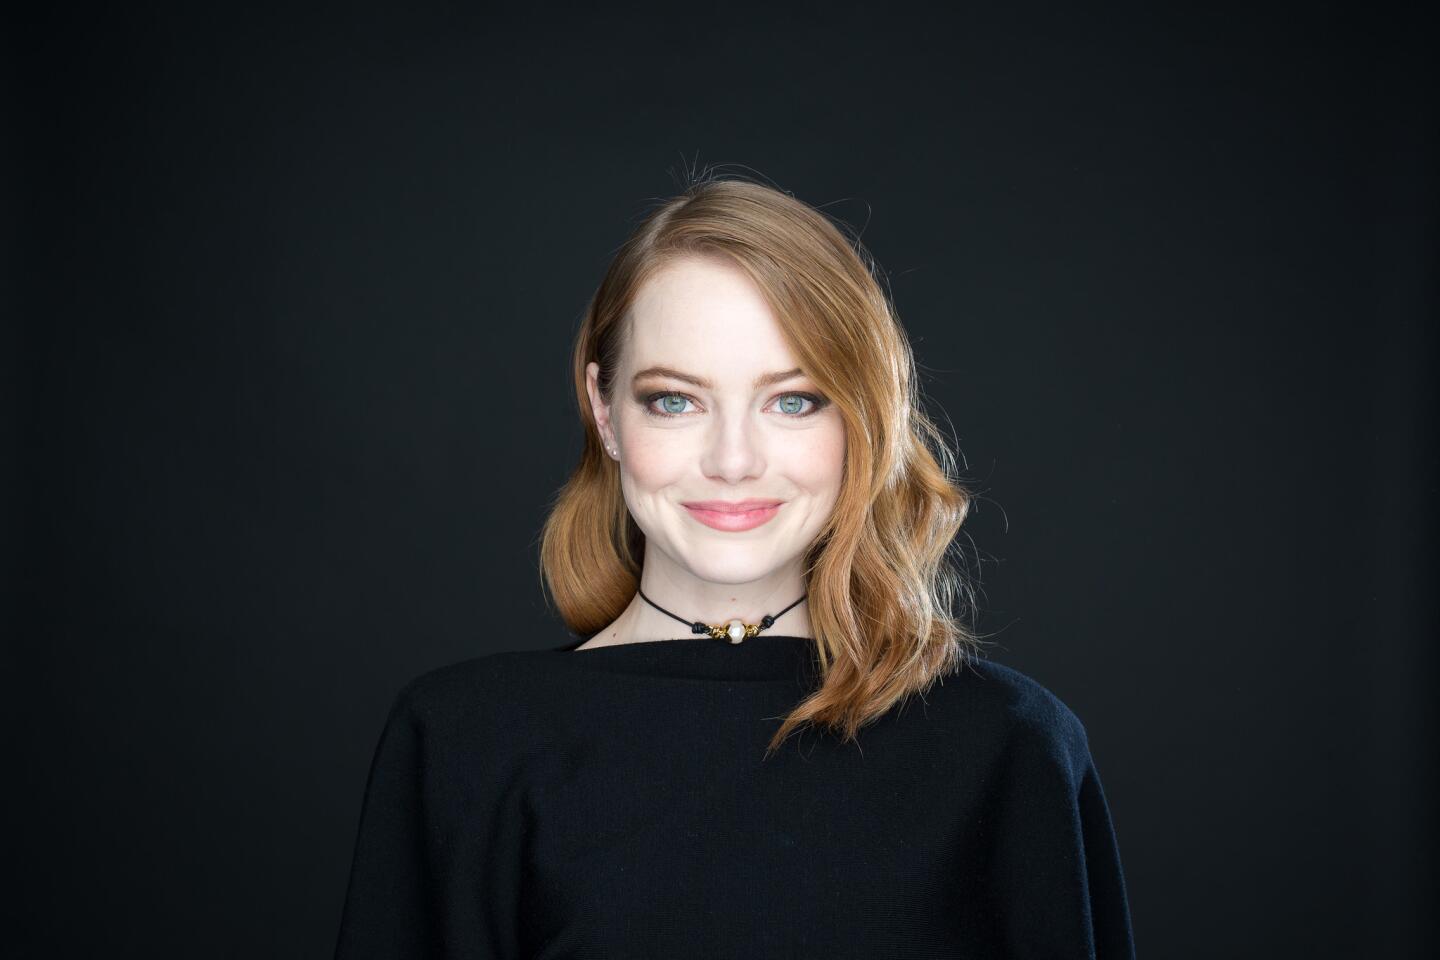 After earning her first nomination in this category in 2015, Emma Stone won best actress in 2017 for “La La Land” (and it was her name in an alternate envelope that led to the film’s short-lived status as a best picture winner). “The Favourite” has also snagged her SAG, BAFTA and Golden Globe nominations, all opposite costar Rachel Weisz.